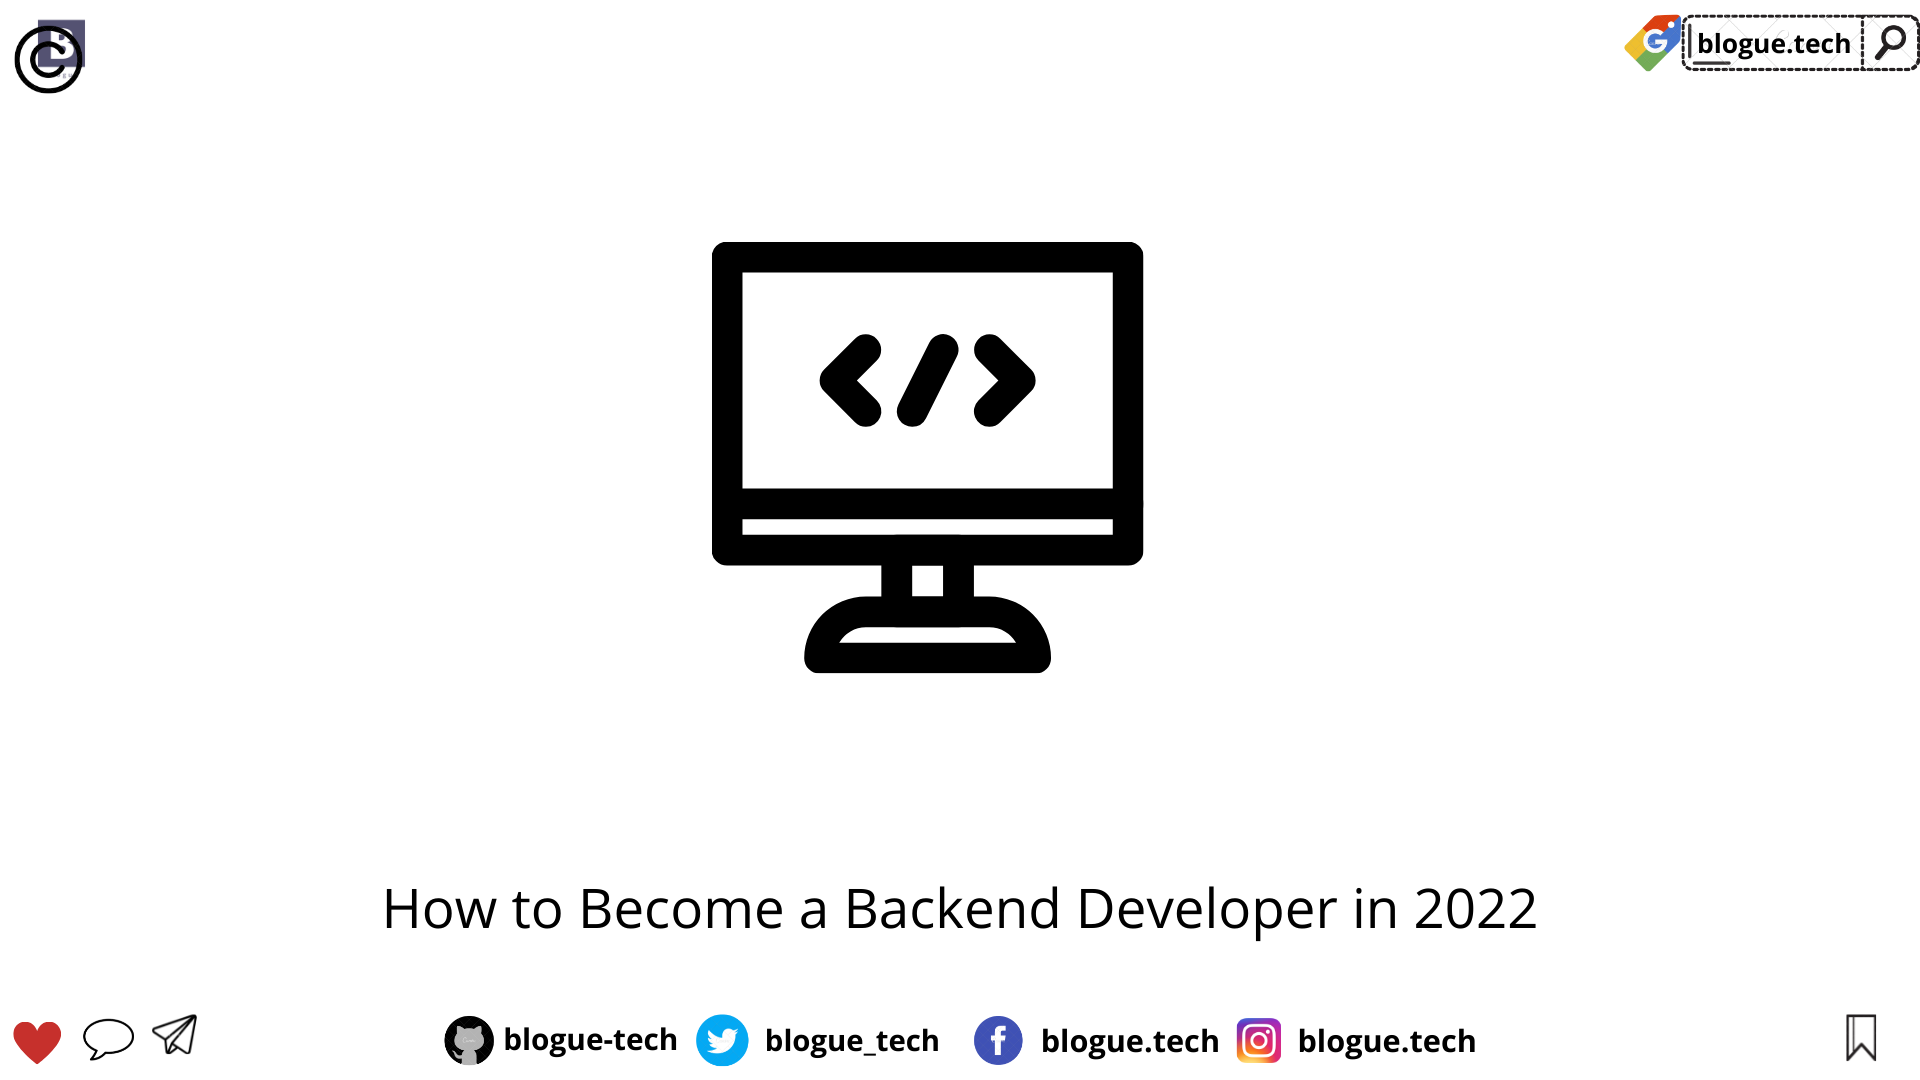 How to Become a Backend Developer in 2022